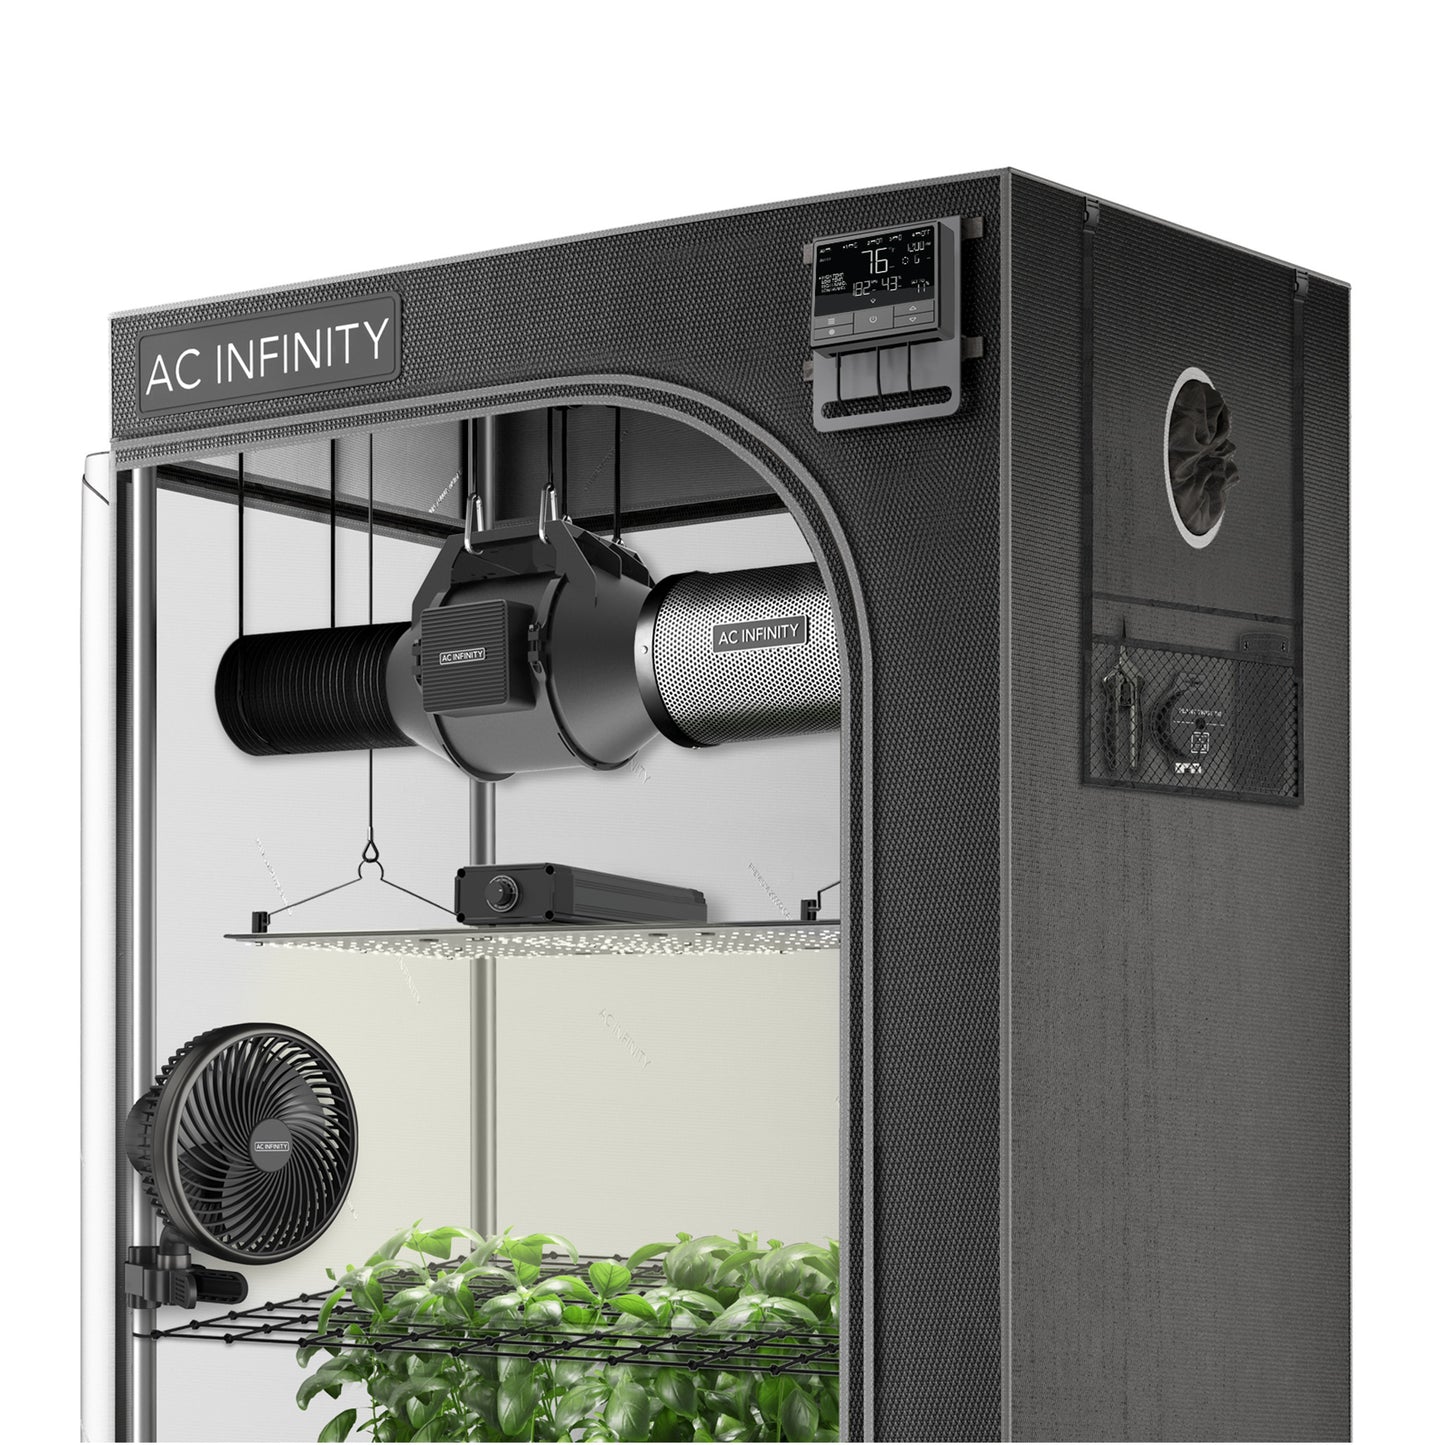 ADVANCE GROW TENT SYSTEM 2X4, 2-PLANT KIT, WIFI-INTEGRATED CONTROLS TO AUTOMATE VENTILATION, CIRCULATION, FULL SPECTRUM LED GROW LIGHT